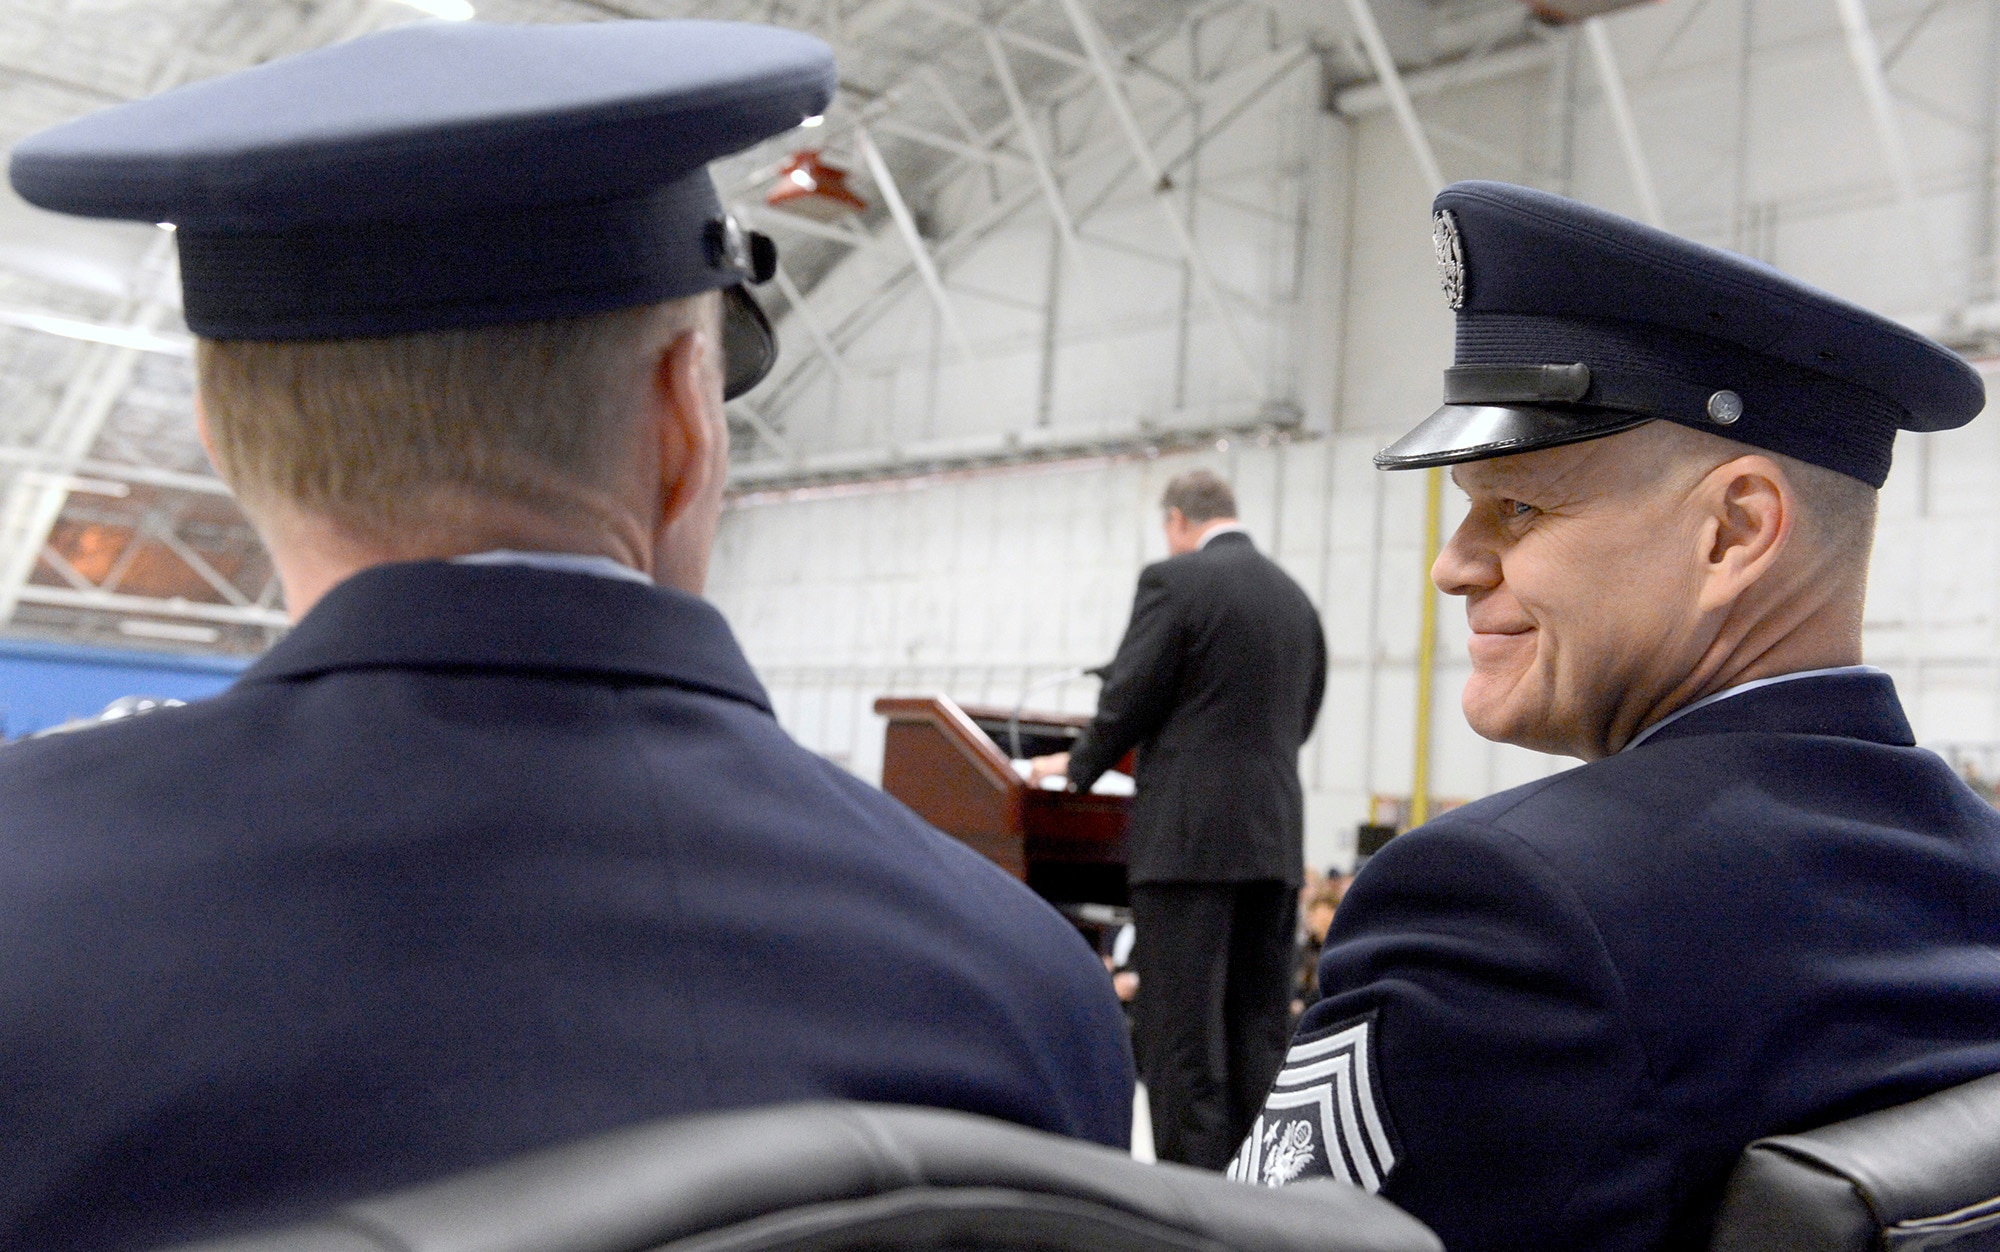 Chief Master Sgt. of the Air Force James Roy encourages his successor Chief Master Sgt. James Cody during their transition ceremony while Secretary of the Air Force Michael Donley congratulates them at Joint Base Andrews, Md., Jan. 24, 2013.   (U.S. Air Force photo/Scott M. Ash)